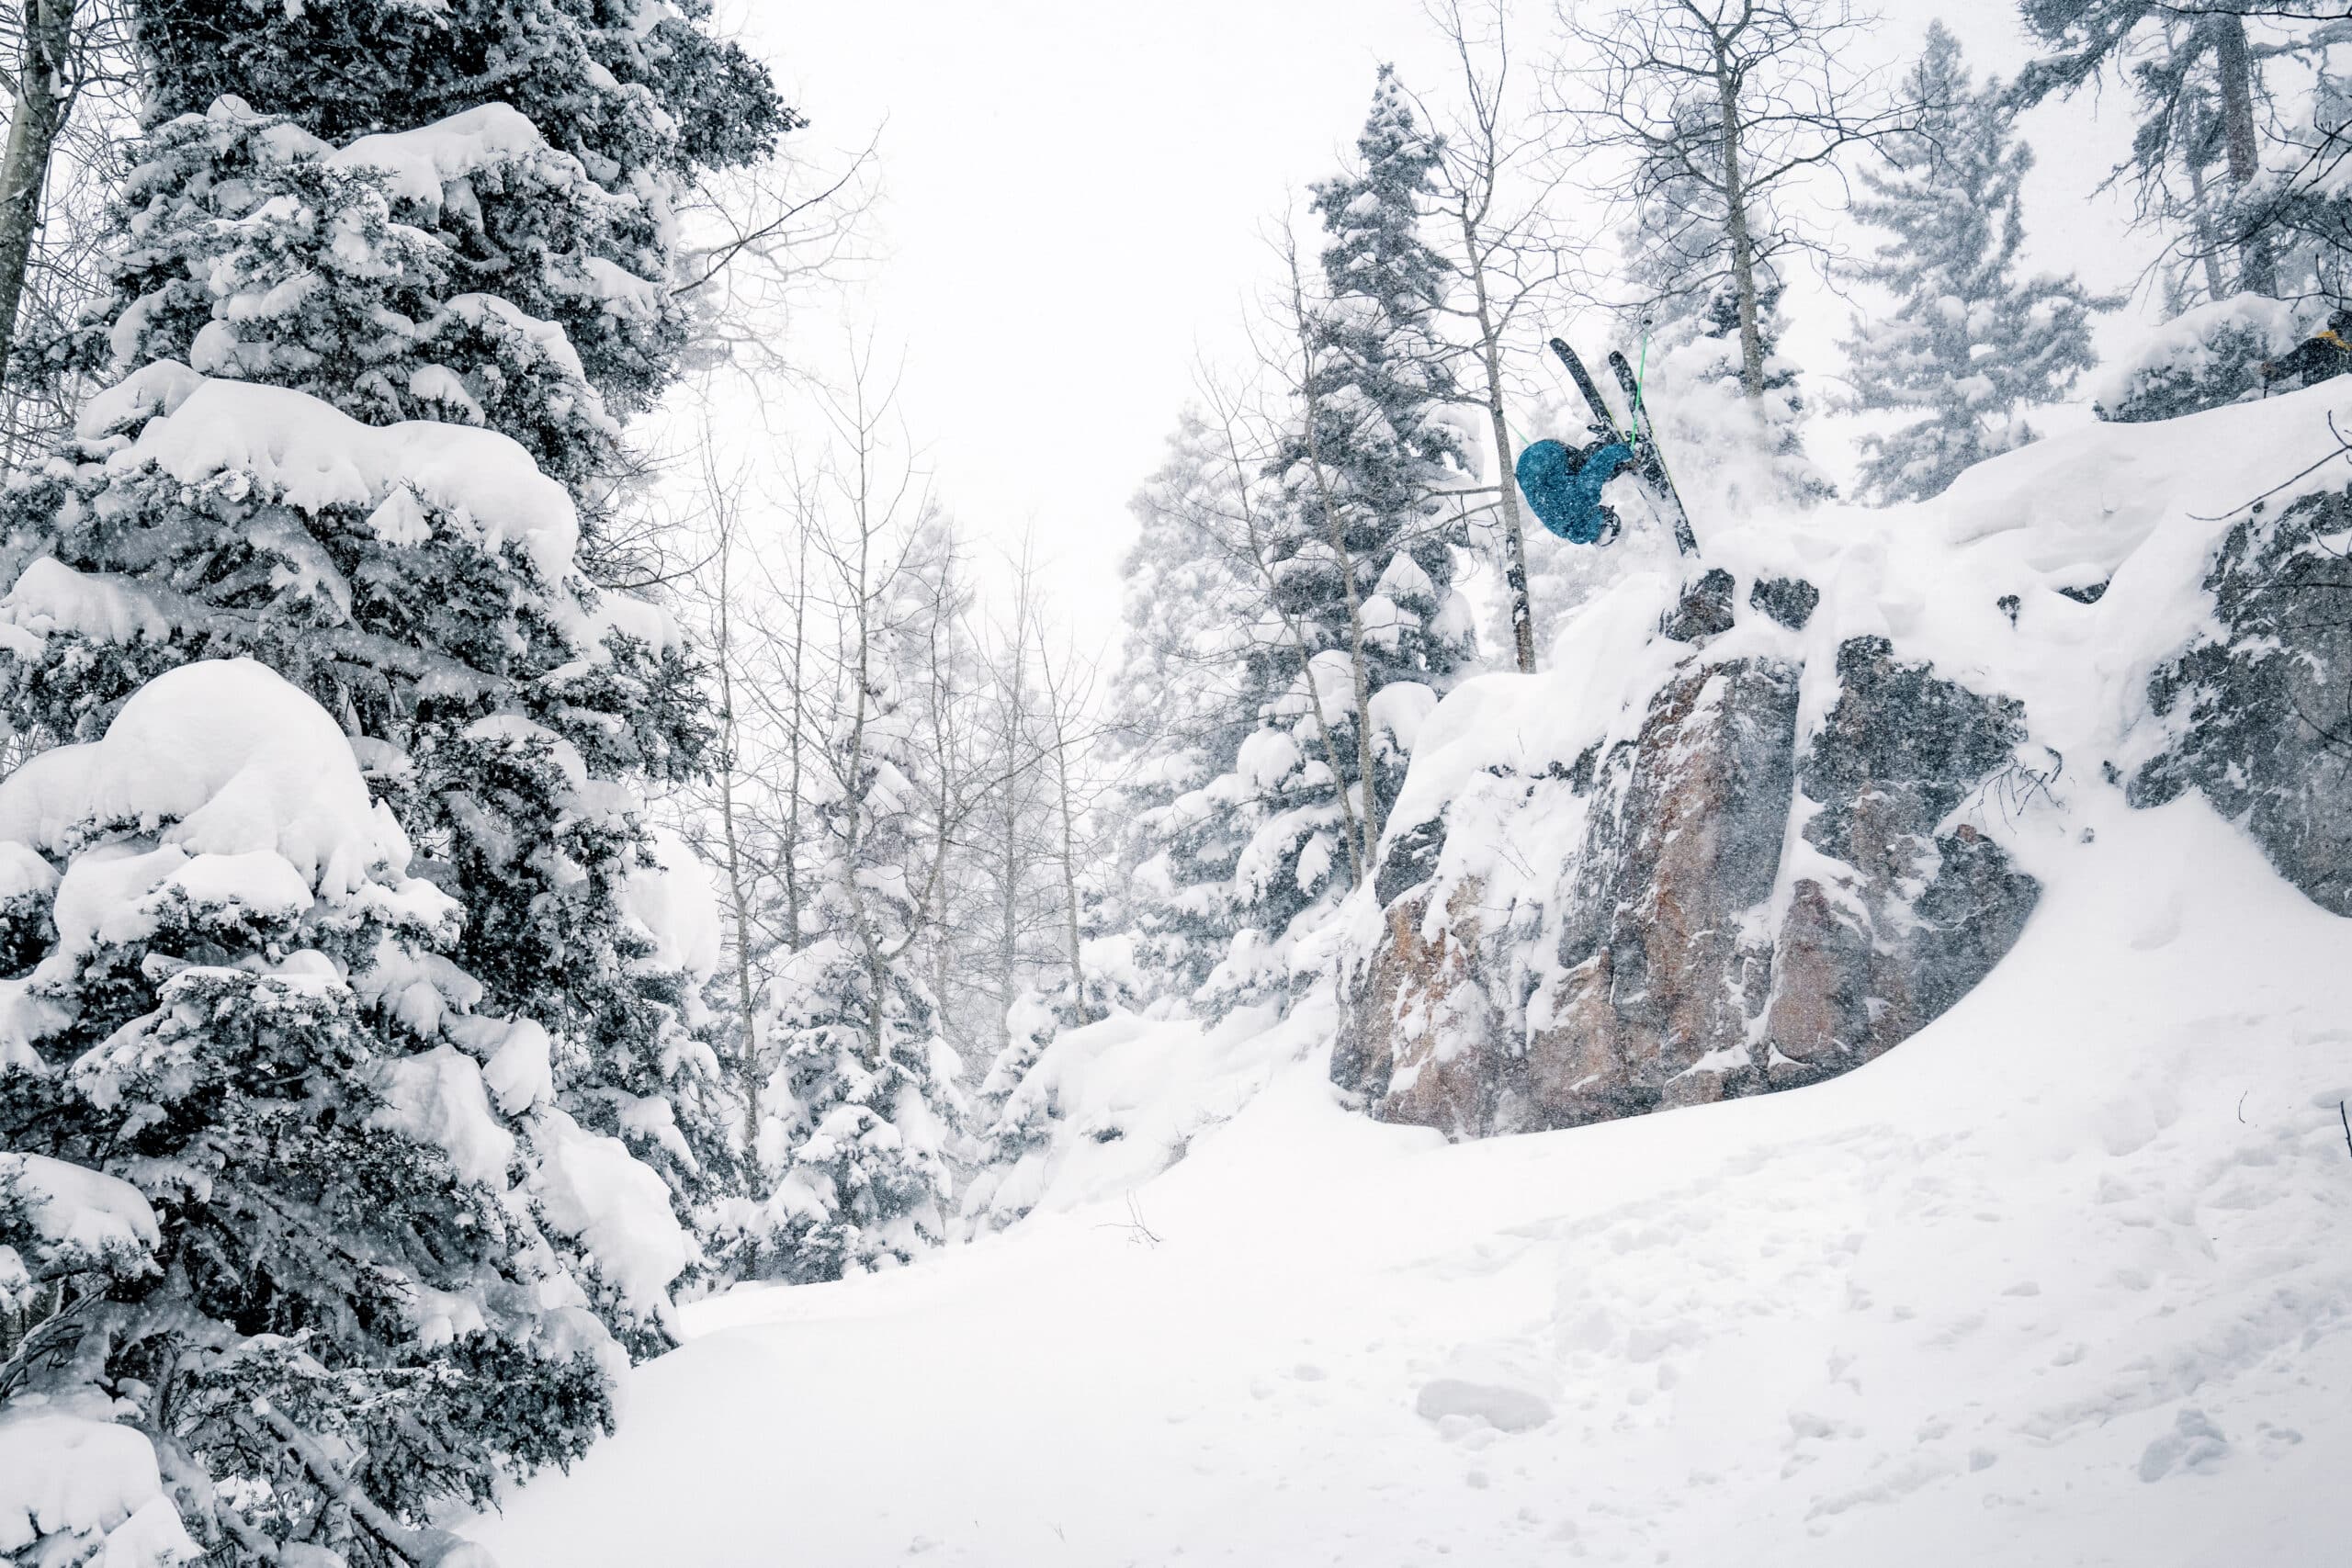 Skier front flipping off a cliff on a powder day